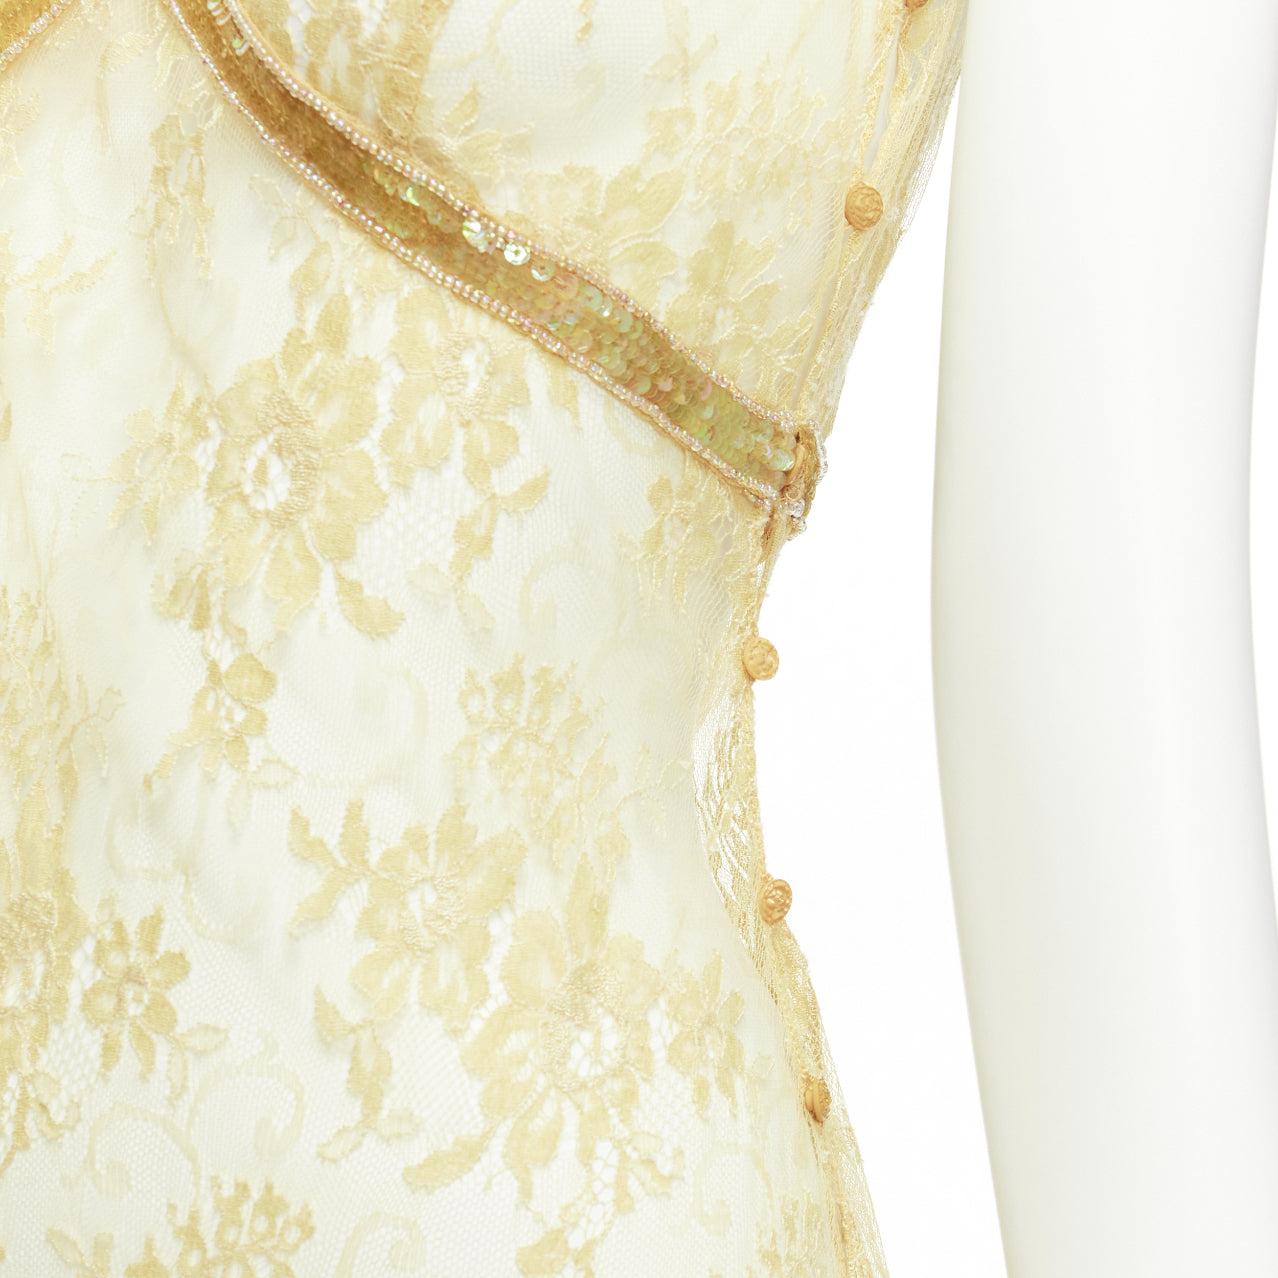 COLLETTE DINNIGAN Vintage gold sequins floral lace see through sheer dress S
Reference: TGAS/D01084
Brand: Collette Dinnigan
Material: Rayon, Blend
Color: Gold, Beige
Pattern: Lace
Closure: Button
Extra Details: Side buttons.
Made in: